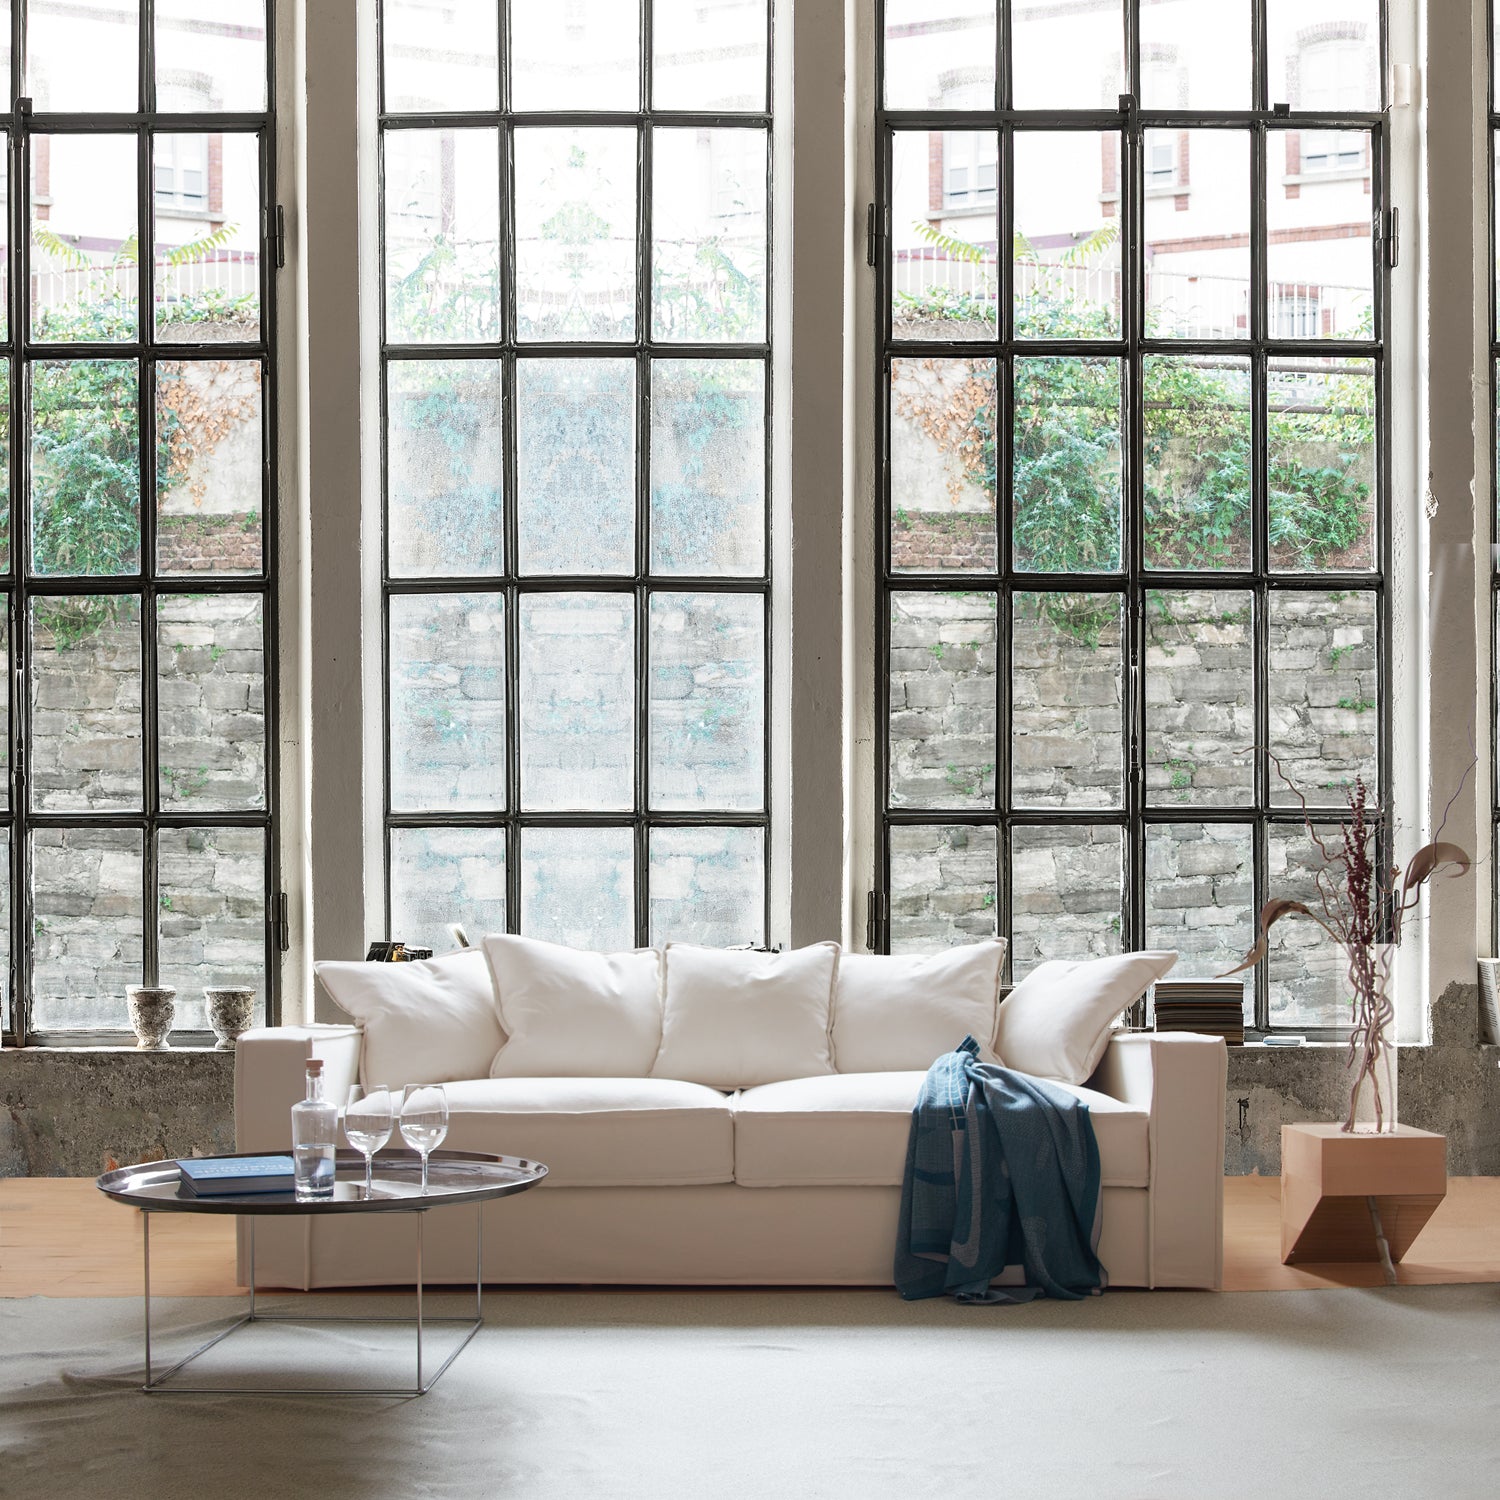 Deep Seats for a Pleasurable Seating Experience. Rafaella sofa in front of industrial window.